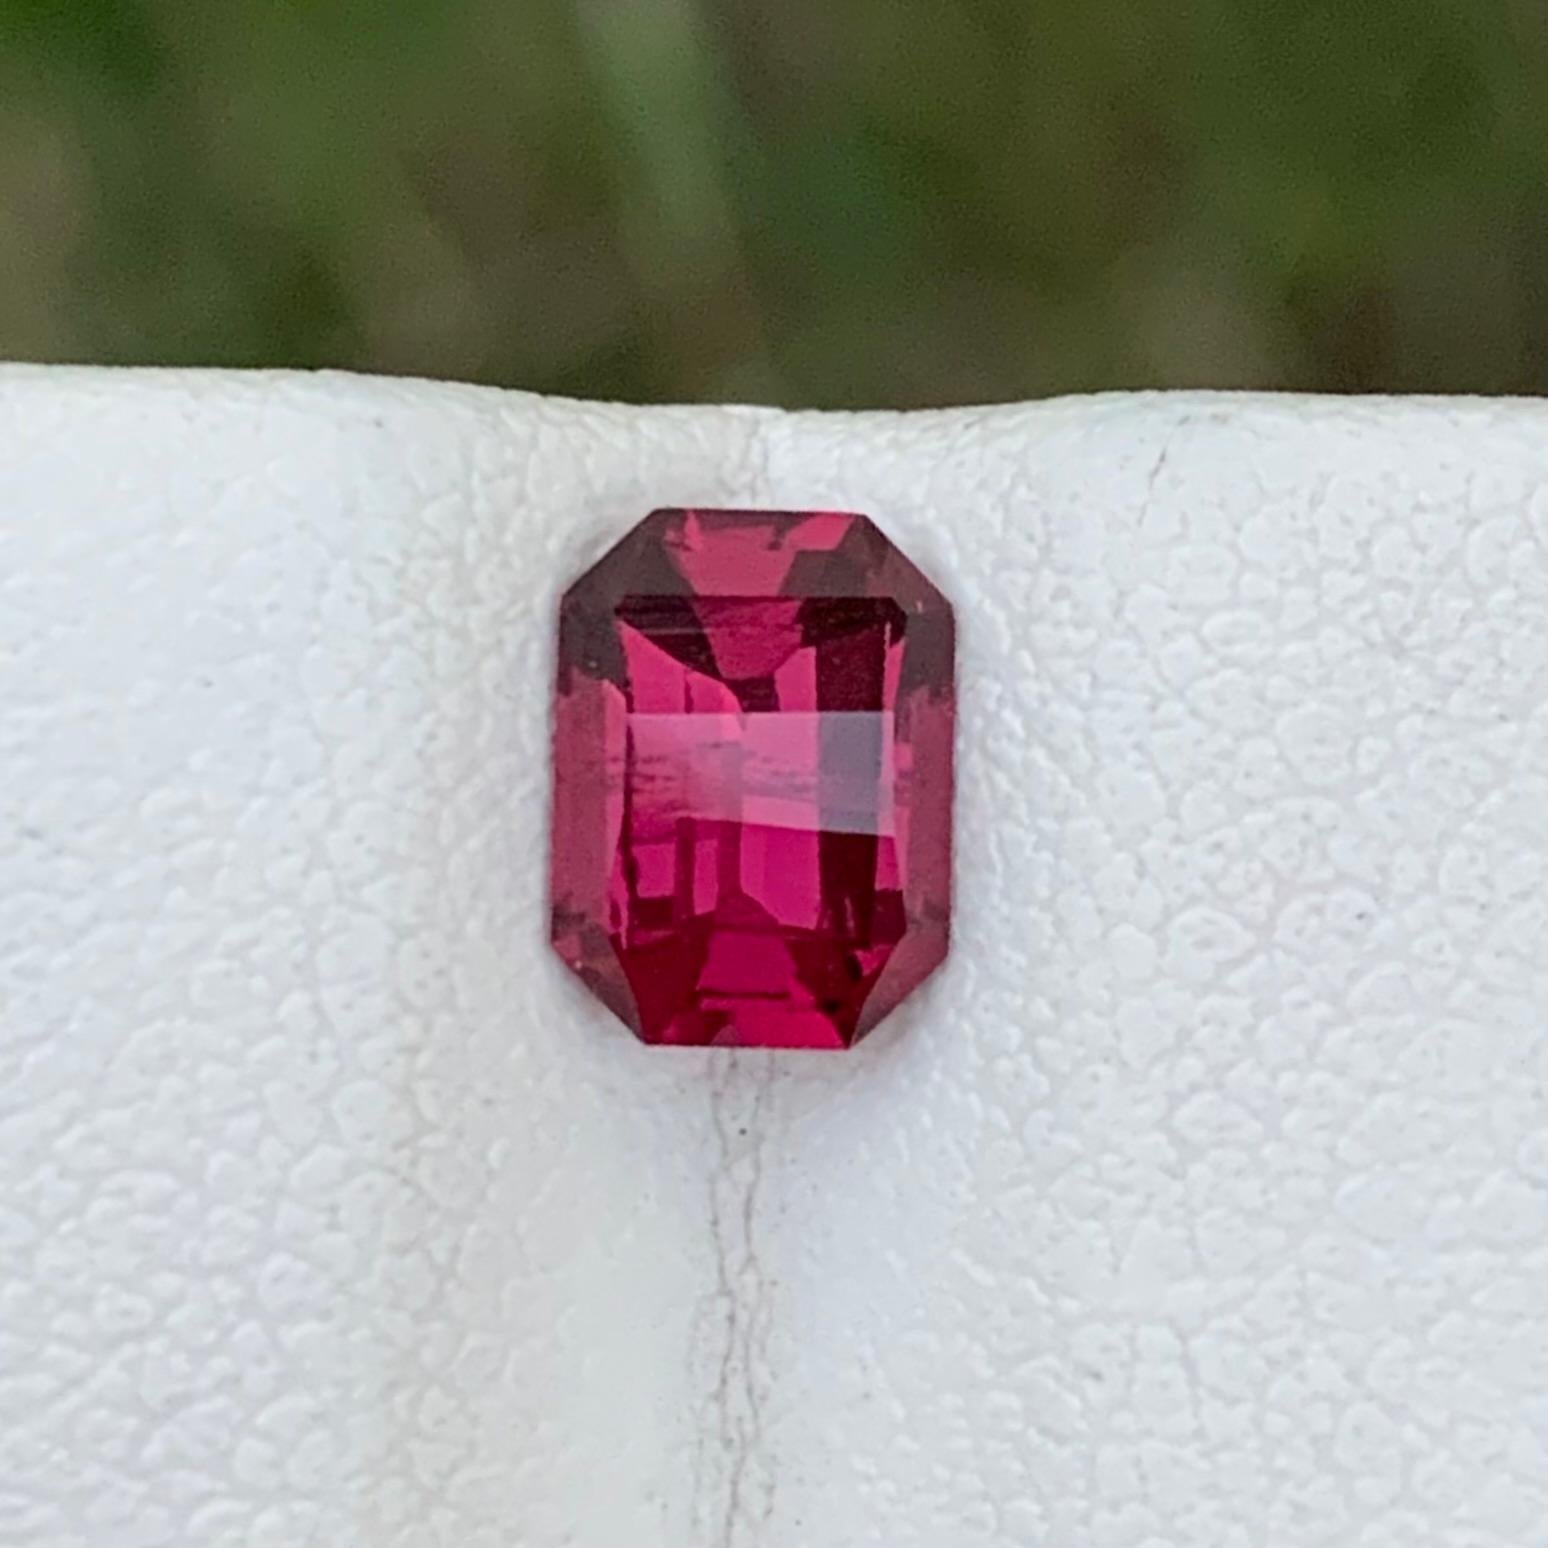 Faceted Rhodolite Garnet
Weight: 0.95 Carats 
Dimension: 6.8x5x3.3 Mm
Origin: Tanzania 
Color: Purplish Pink
Shape: Pixelated 
Rhodolite garnet is a striking and valuable gemstone that stands out for its alluring red-violet to purplish-red color.